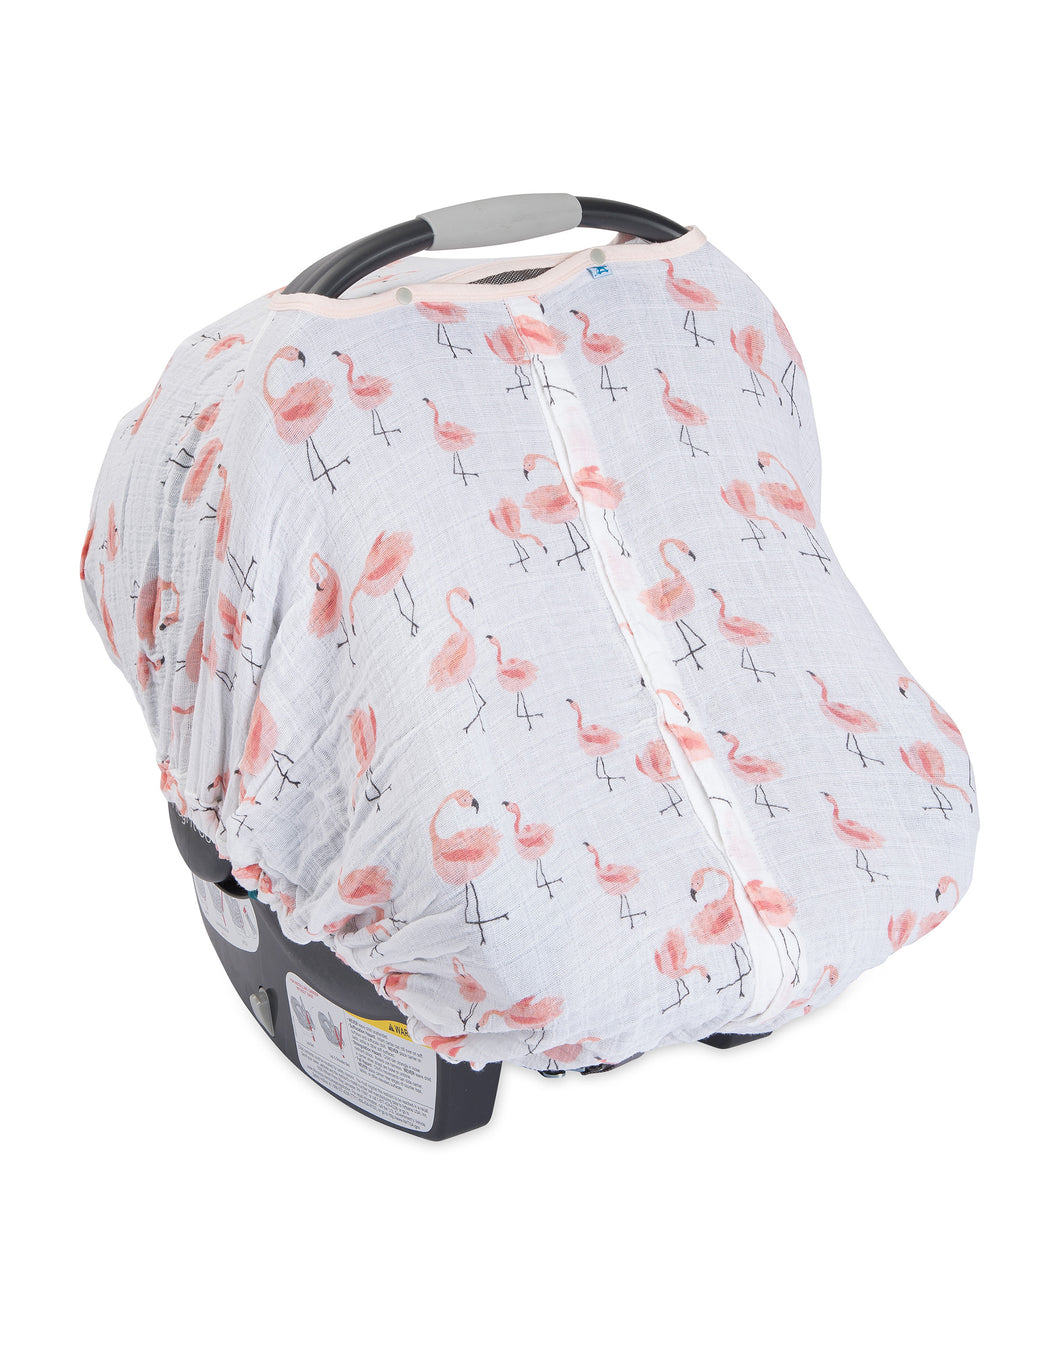 Cotton Muslin Car Seat Canopy - Pink Ladies